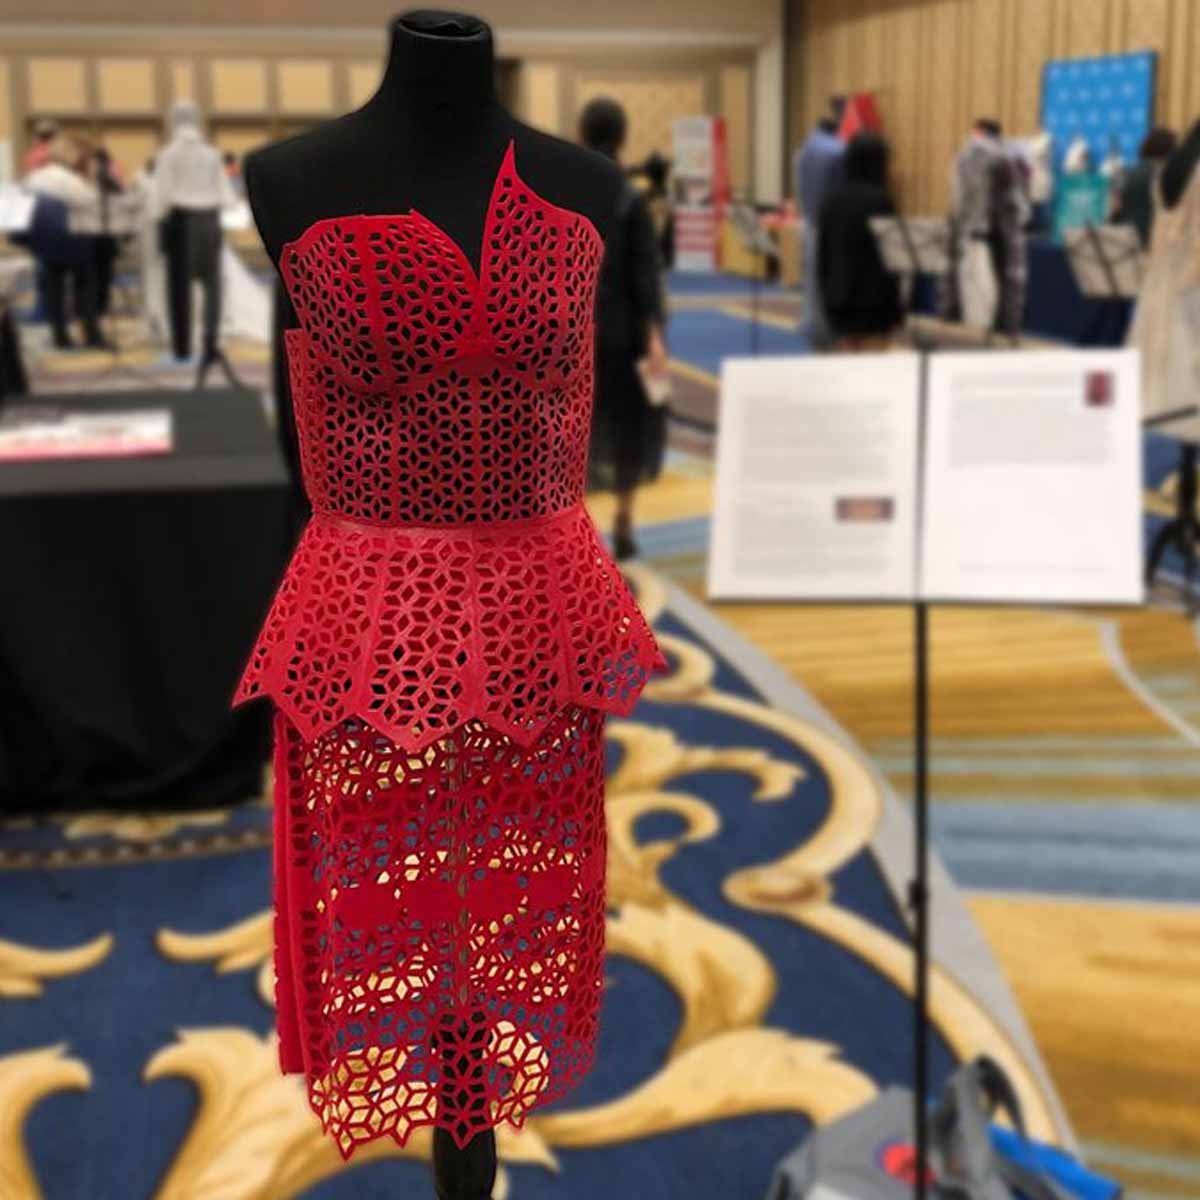 Kawthar Alibrahim, a student majoring in apparel, textiles and design, had her 3-D printed dress accepted to the International Textiles and Apparel Association’s annual conference design exhibit